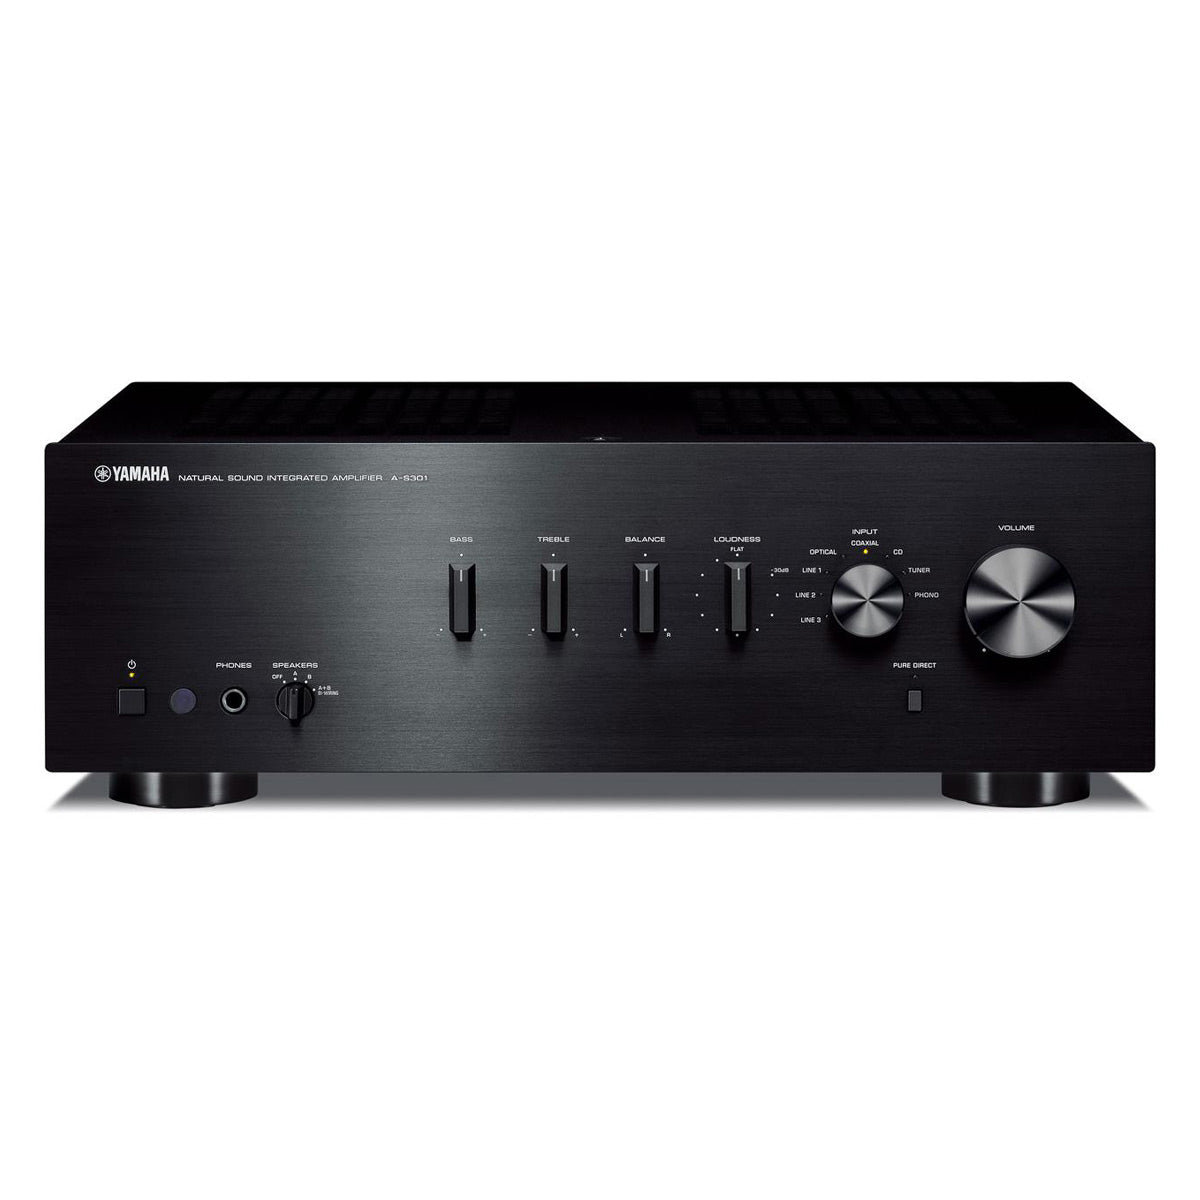 Yamaha CD-S303 CD Player with MP3/WMA/LPCM/FLAC/USB Compatibility with A-S301 Integrated Amplifier